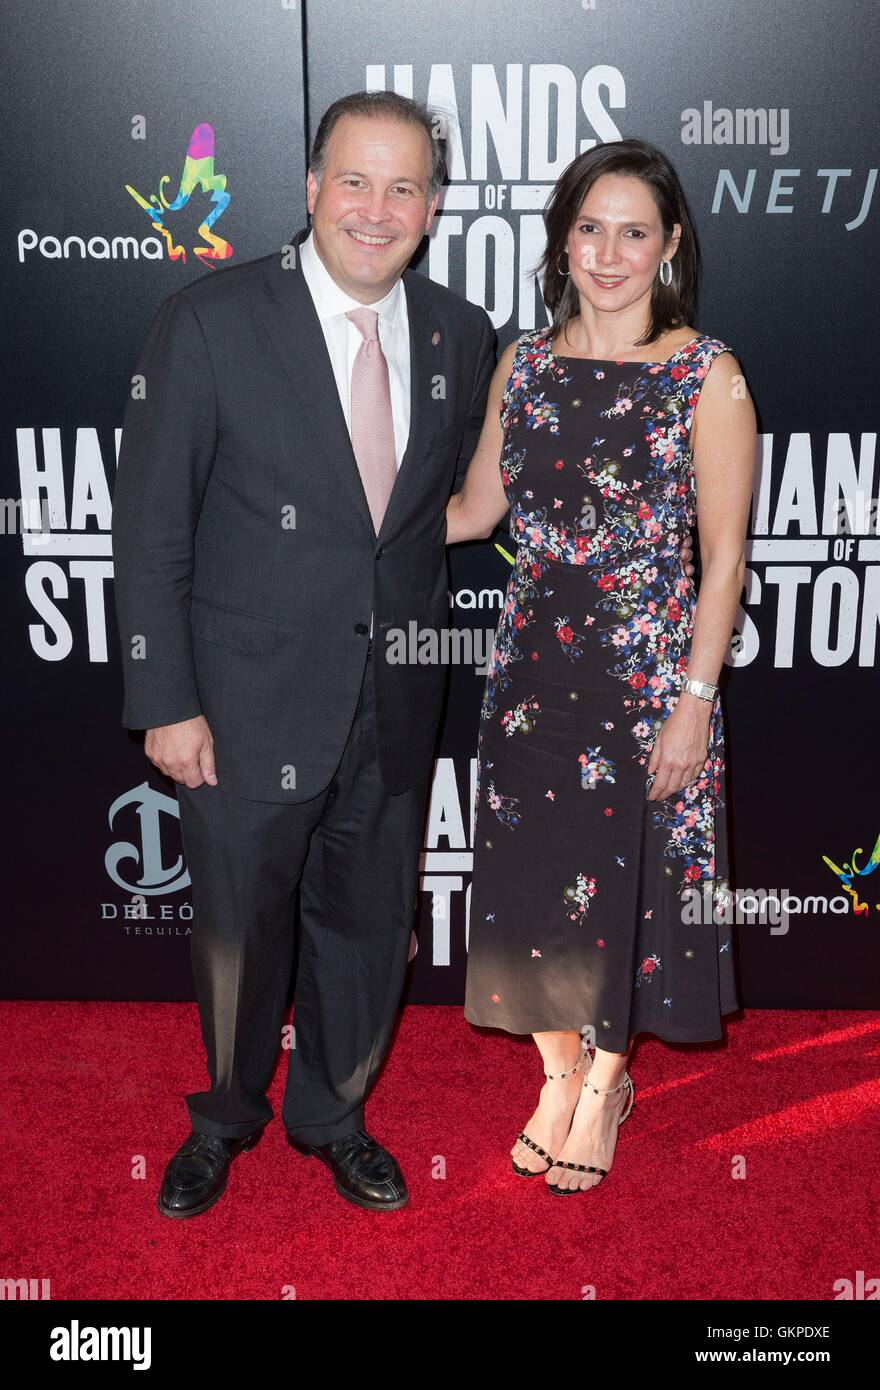 New York, NY, USA. 22nd Aug, 2016. emanuel Gonzales-Revilla, guest at arrivals for HANDS OF STONE Premiere, The School of Visual Arts (SVA) Theatre, New York, NY August 22, 2016. Credit:  Lev Radin/Everett Collection/Alamy Live News Stock Photo